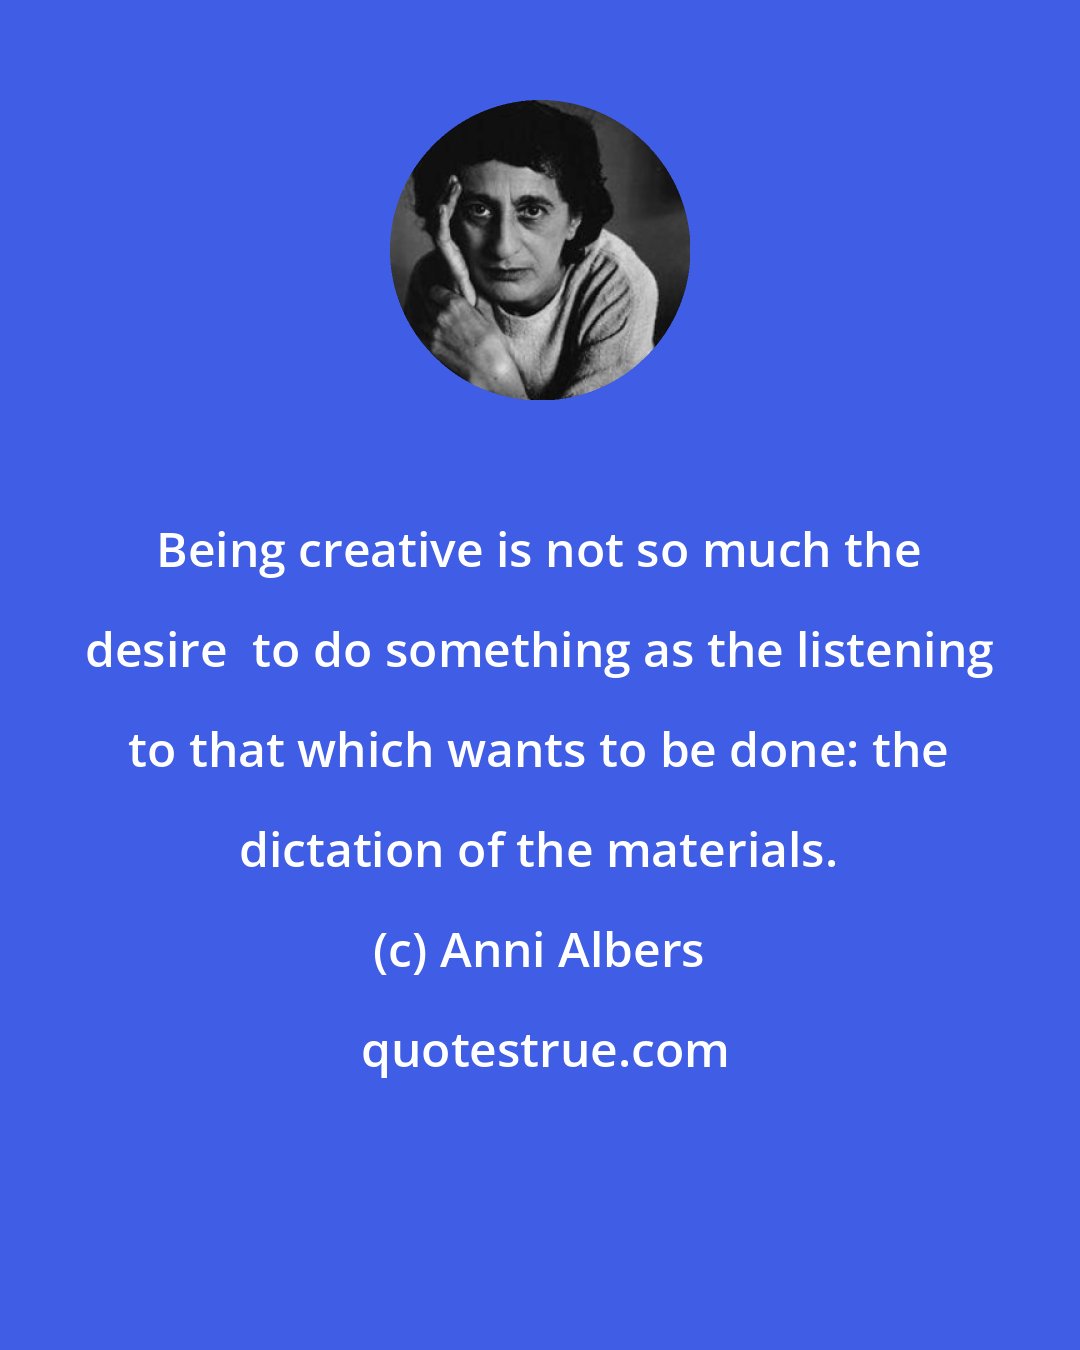 Anni Albers: Being creative is not so much the desire  to do something as the listening to that which wants to be done: the dictation of the materials.